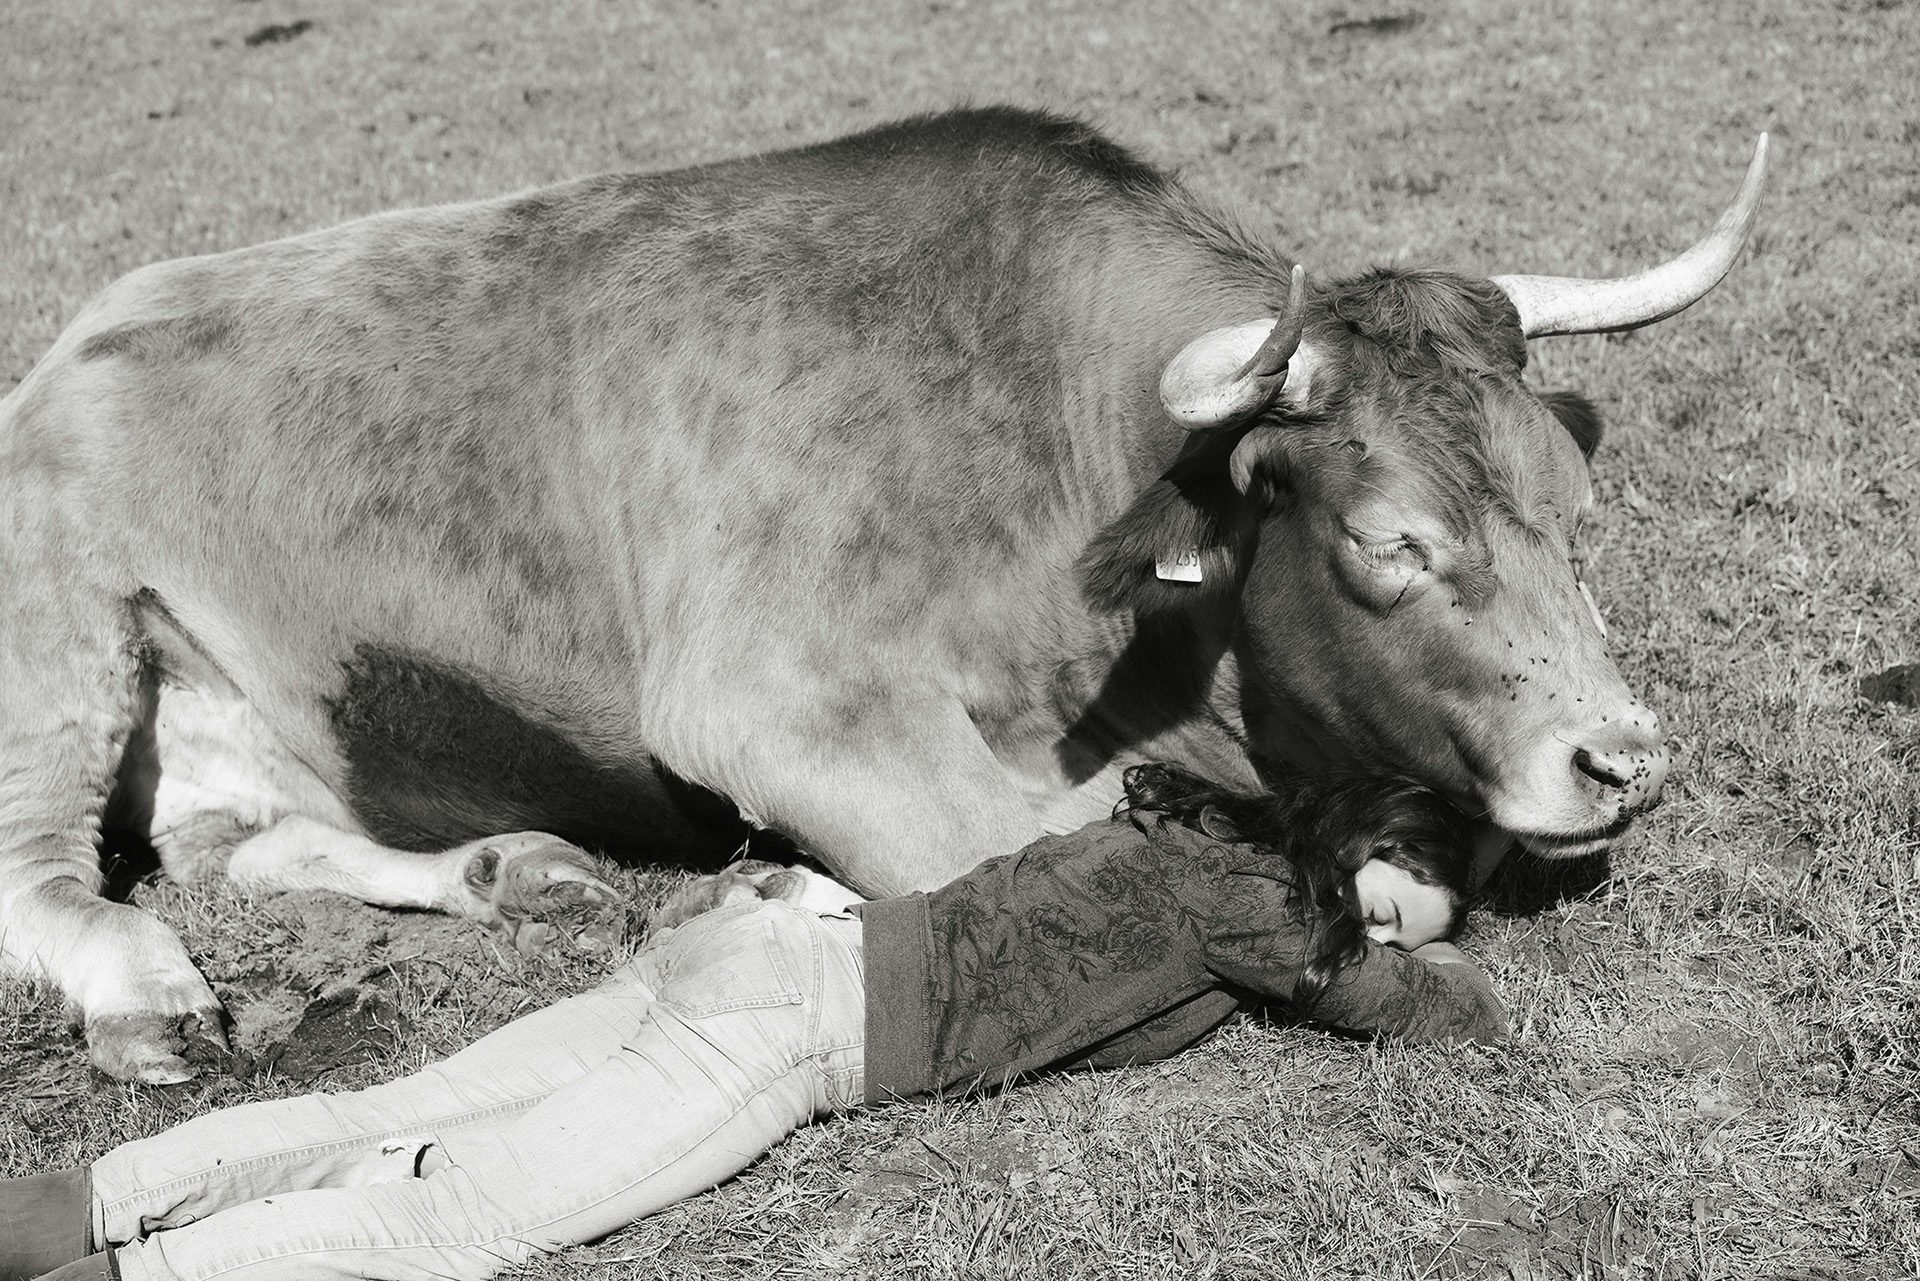 Black and white photograph shows a young person nestled under the chin of a cow lying on the grass, taken from Yana Wernicke's book Companions